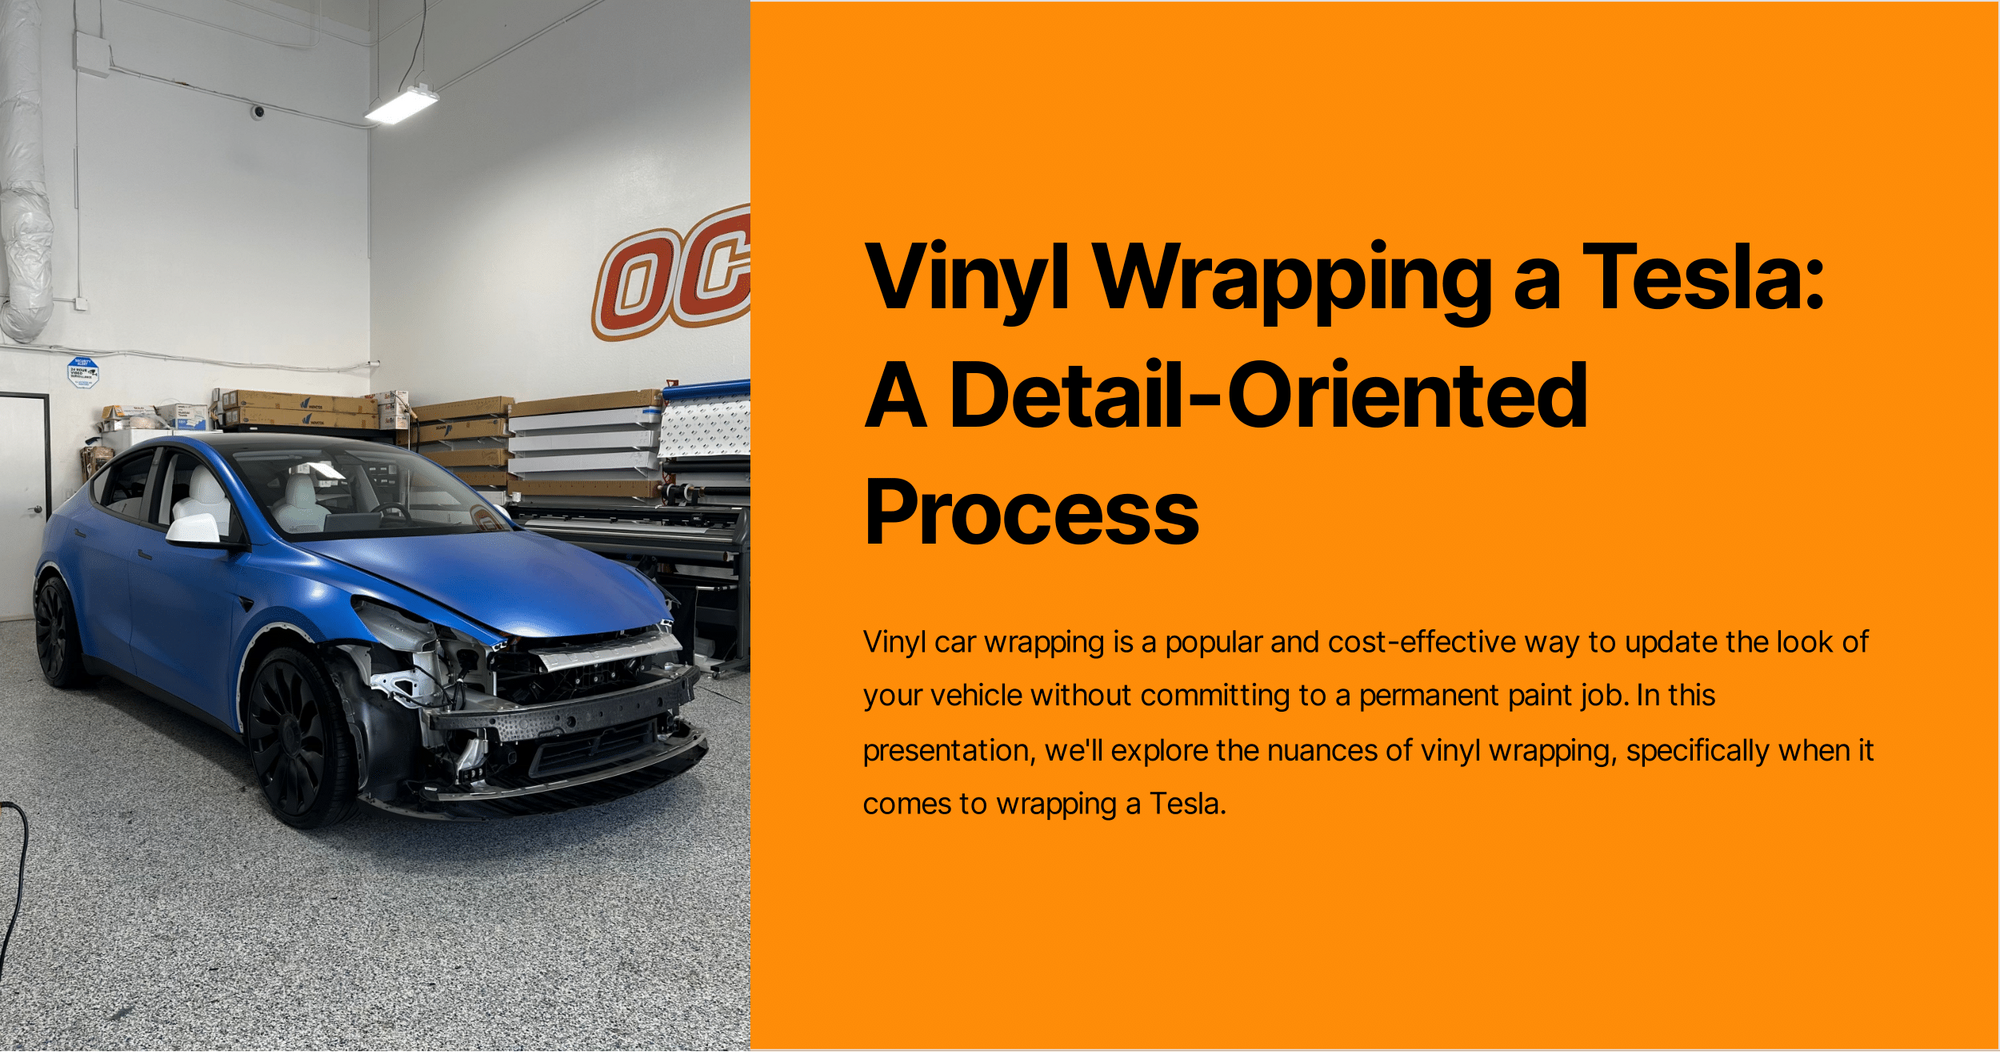 Vinyl-Wrapping-a-Tesla-A-Detail-Oriented-Process (1)-1.png